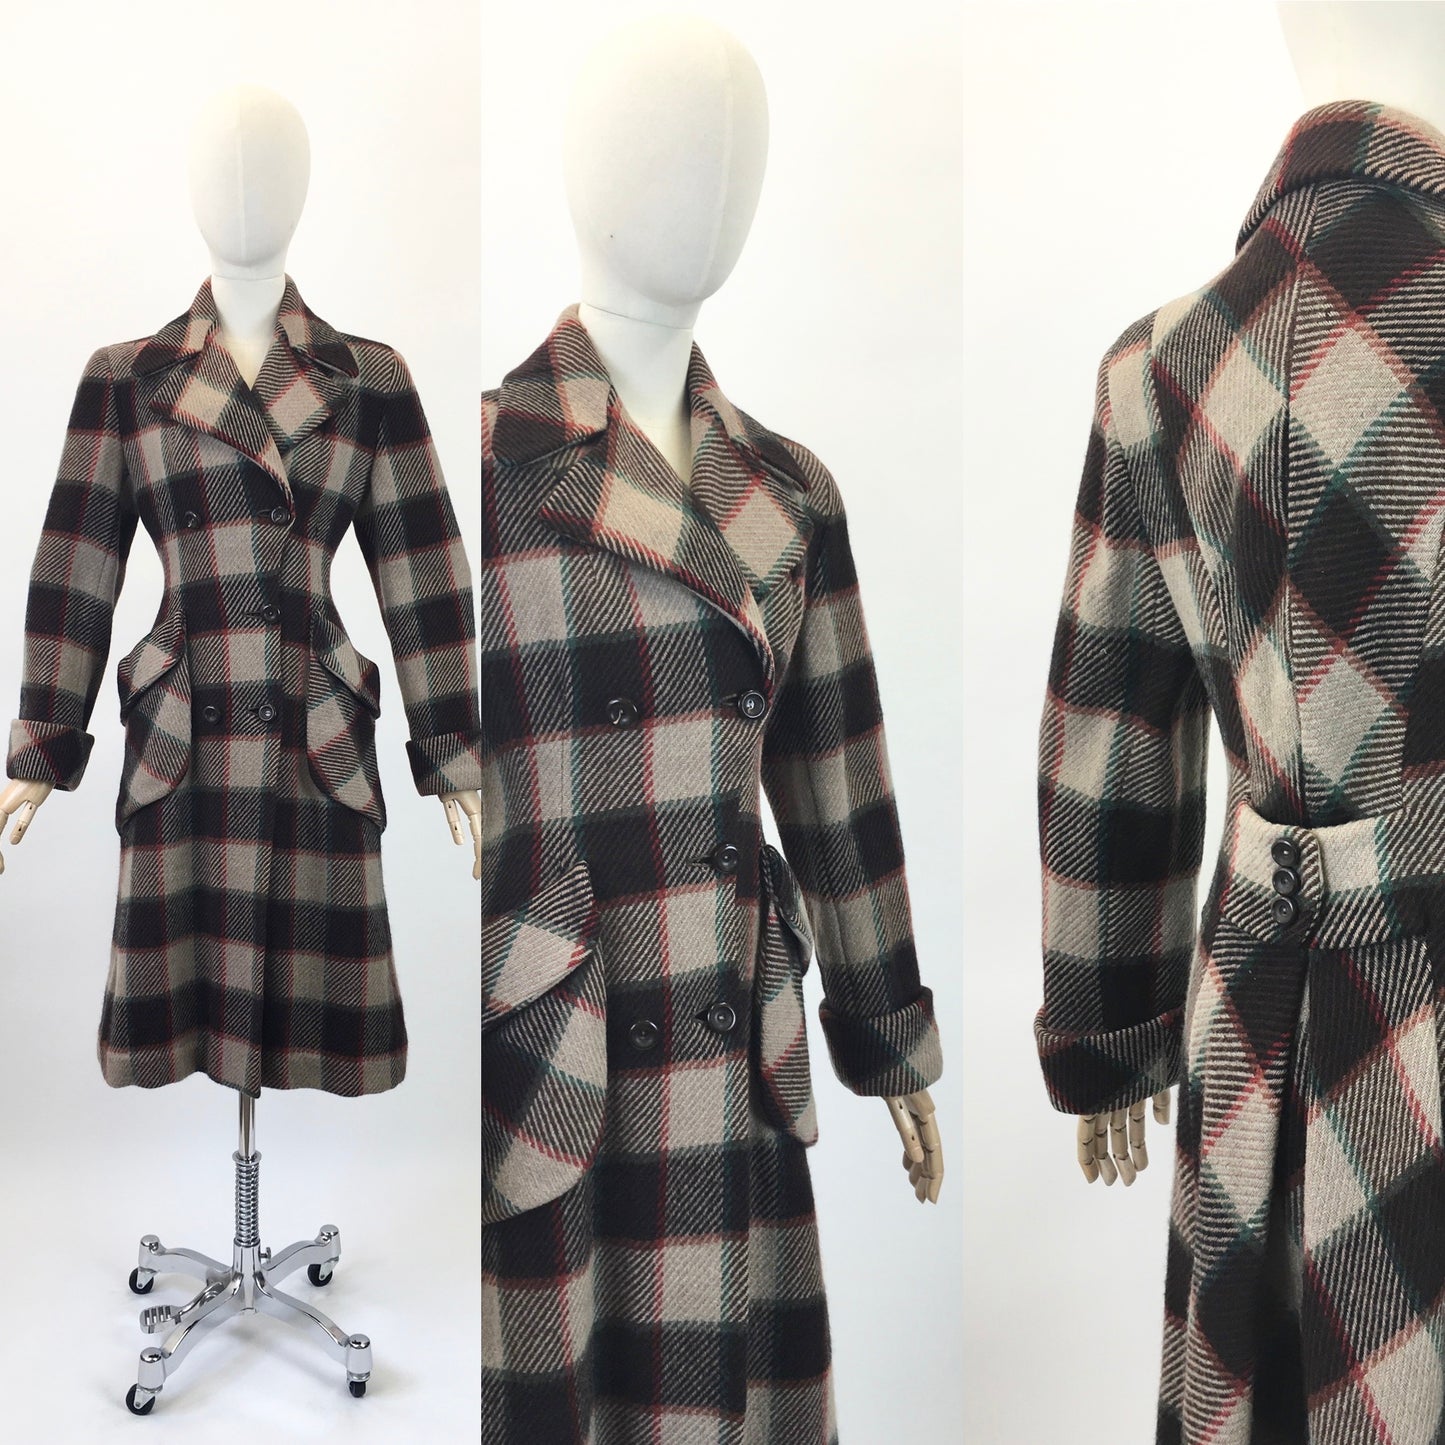 Original 1940's SENSATIONAL CC41 Utility Coat - In A Plaid Colourway of Rust, Warm Brown, Emerald Green and Cinnamon